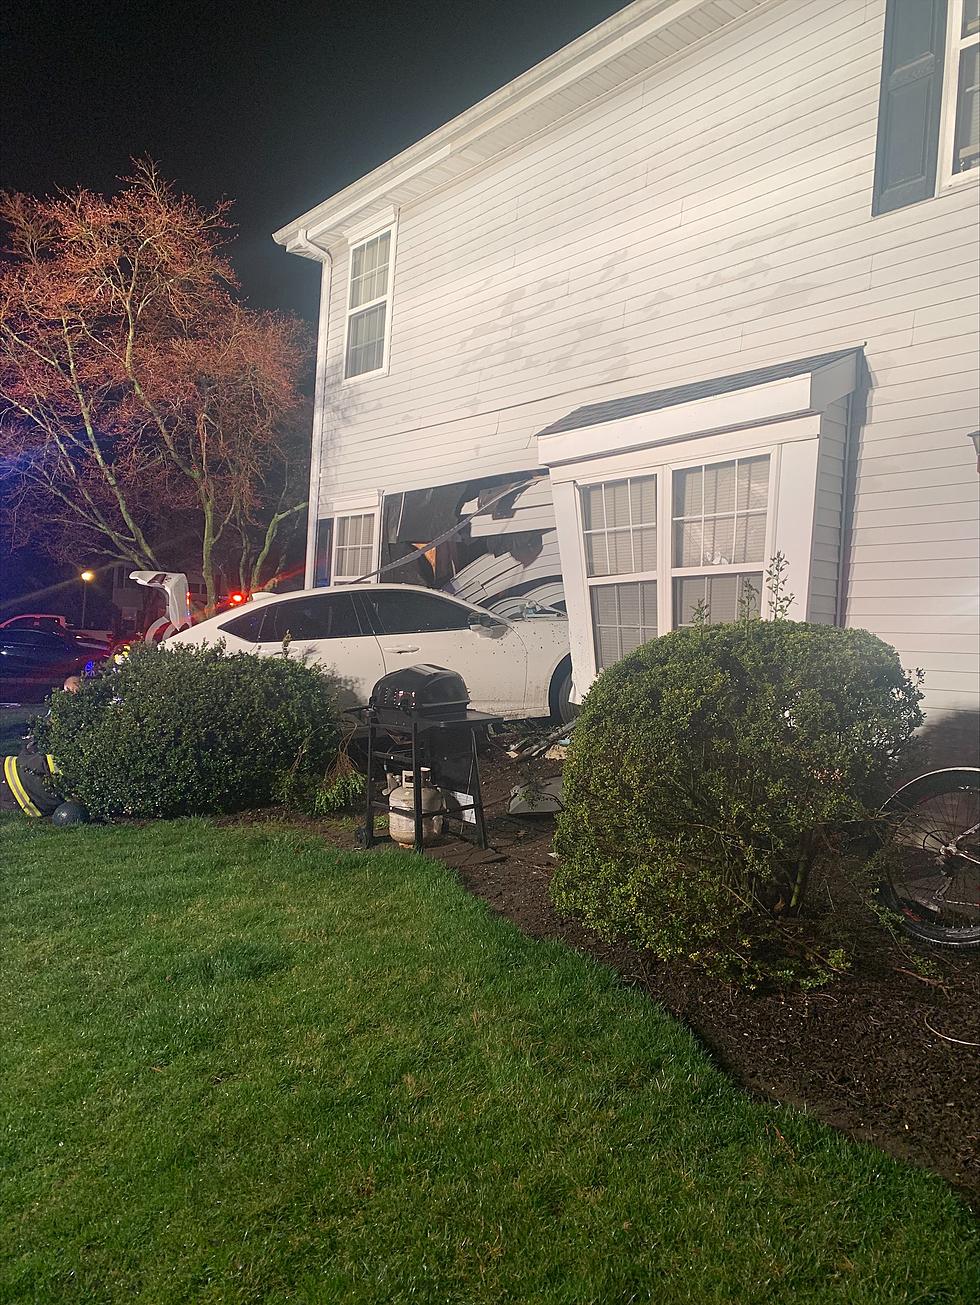 Morganville, NJ woman charged with DWI after crashing into house in Marlboro, NJ